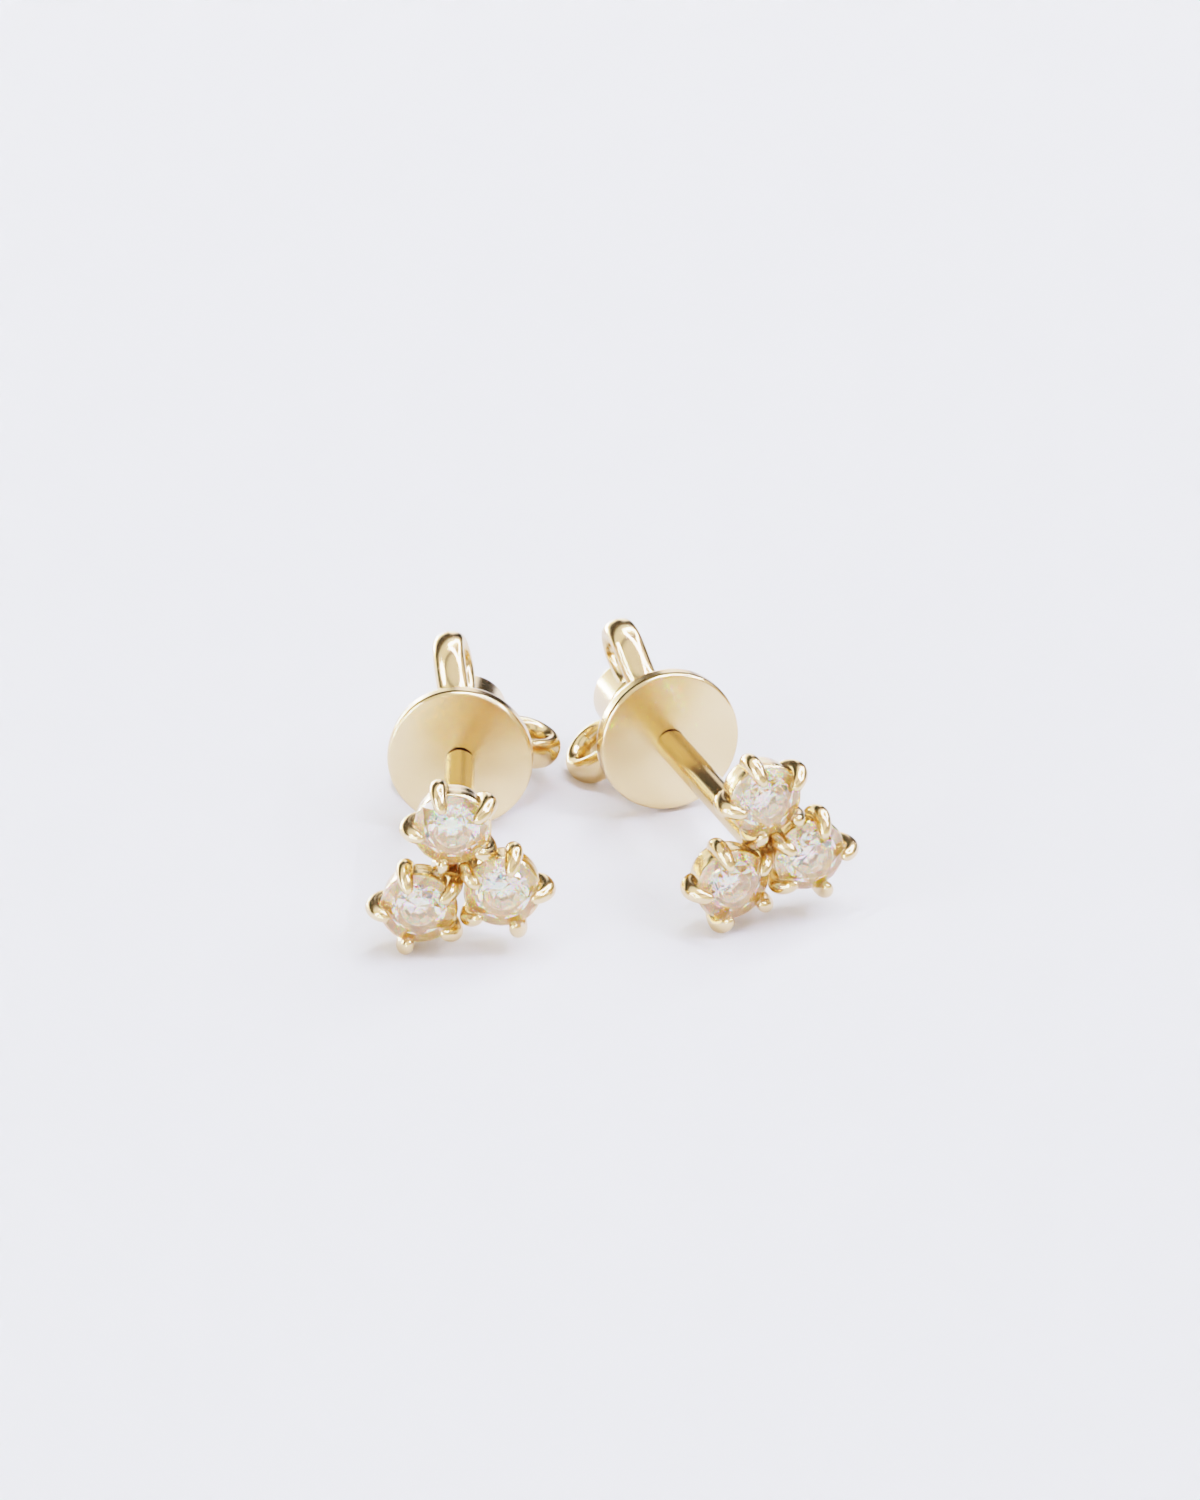 Gold piercing studs with diamonds